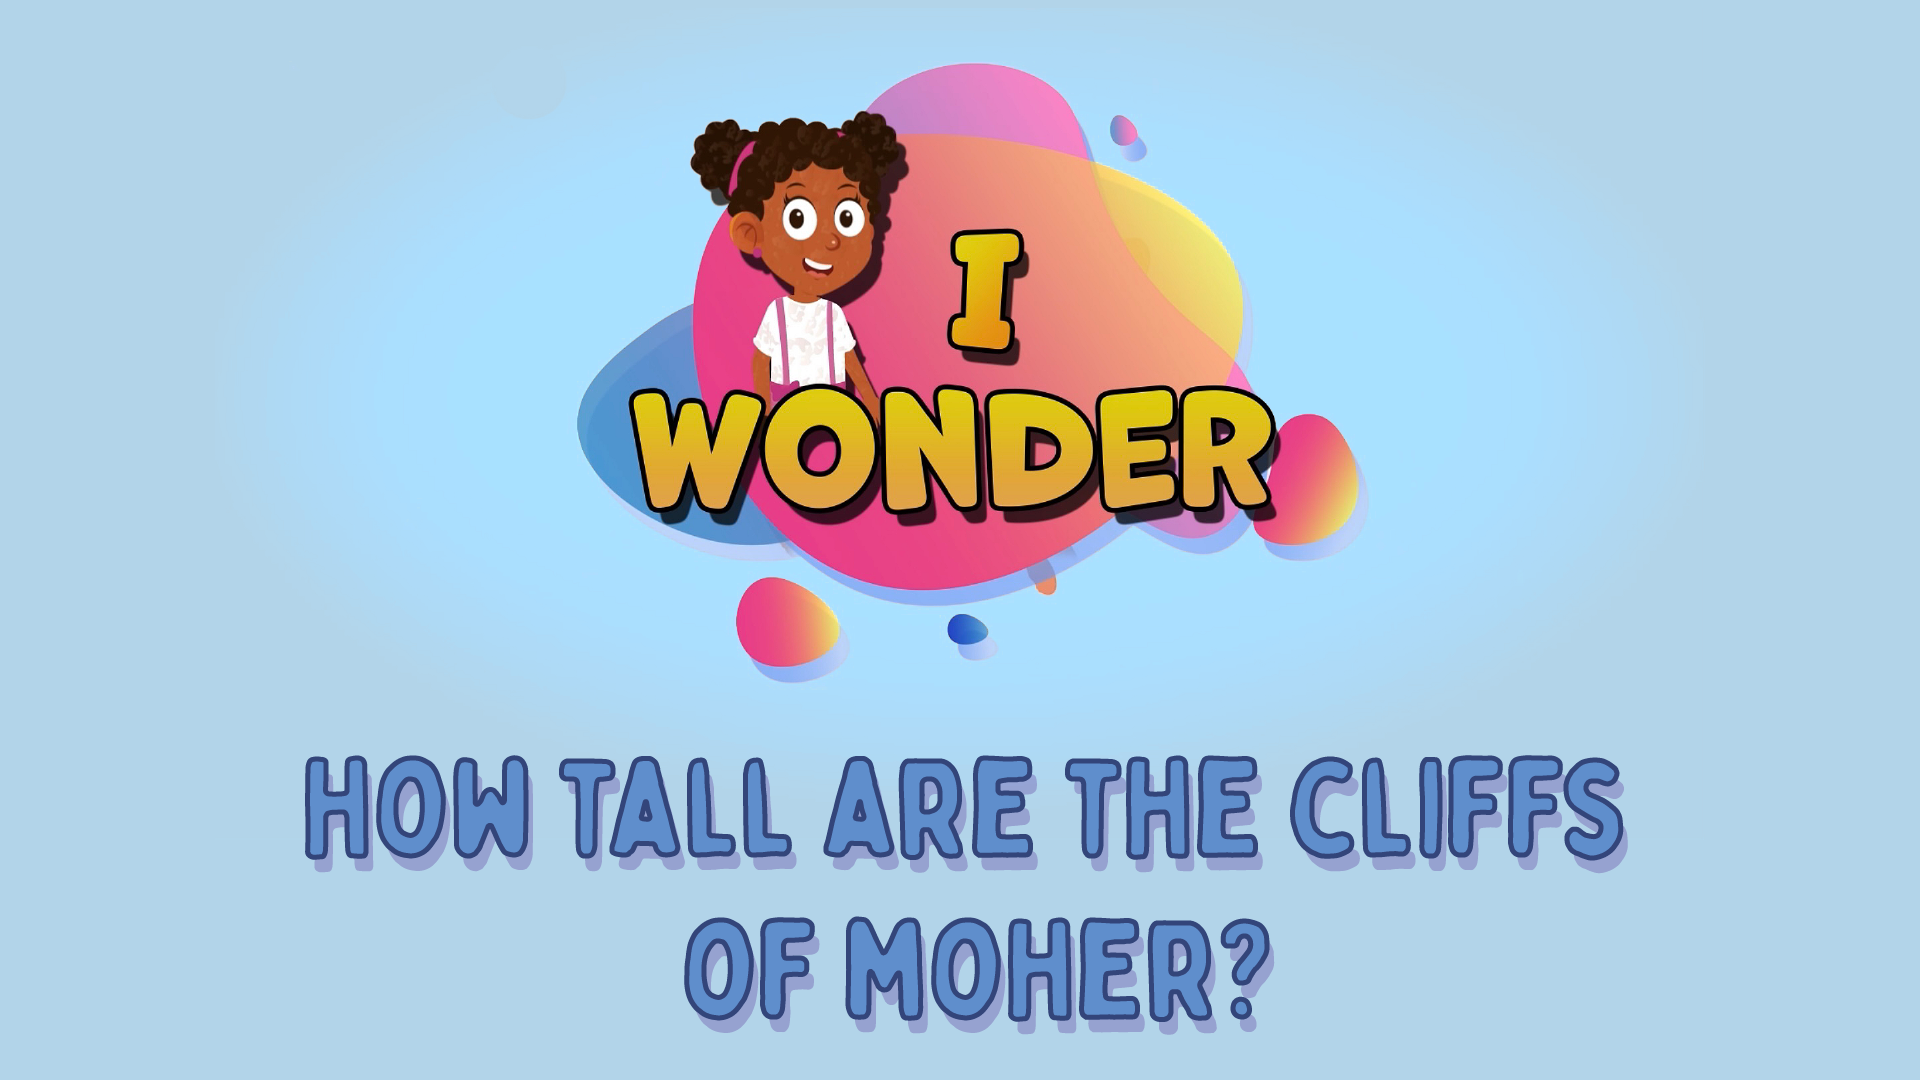 How Tall Are The Cliffs Of Moher?